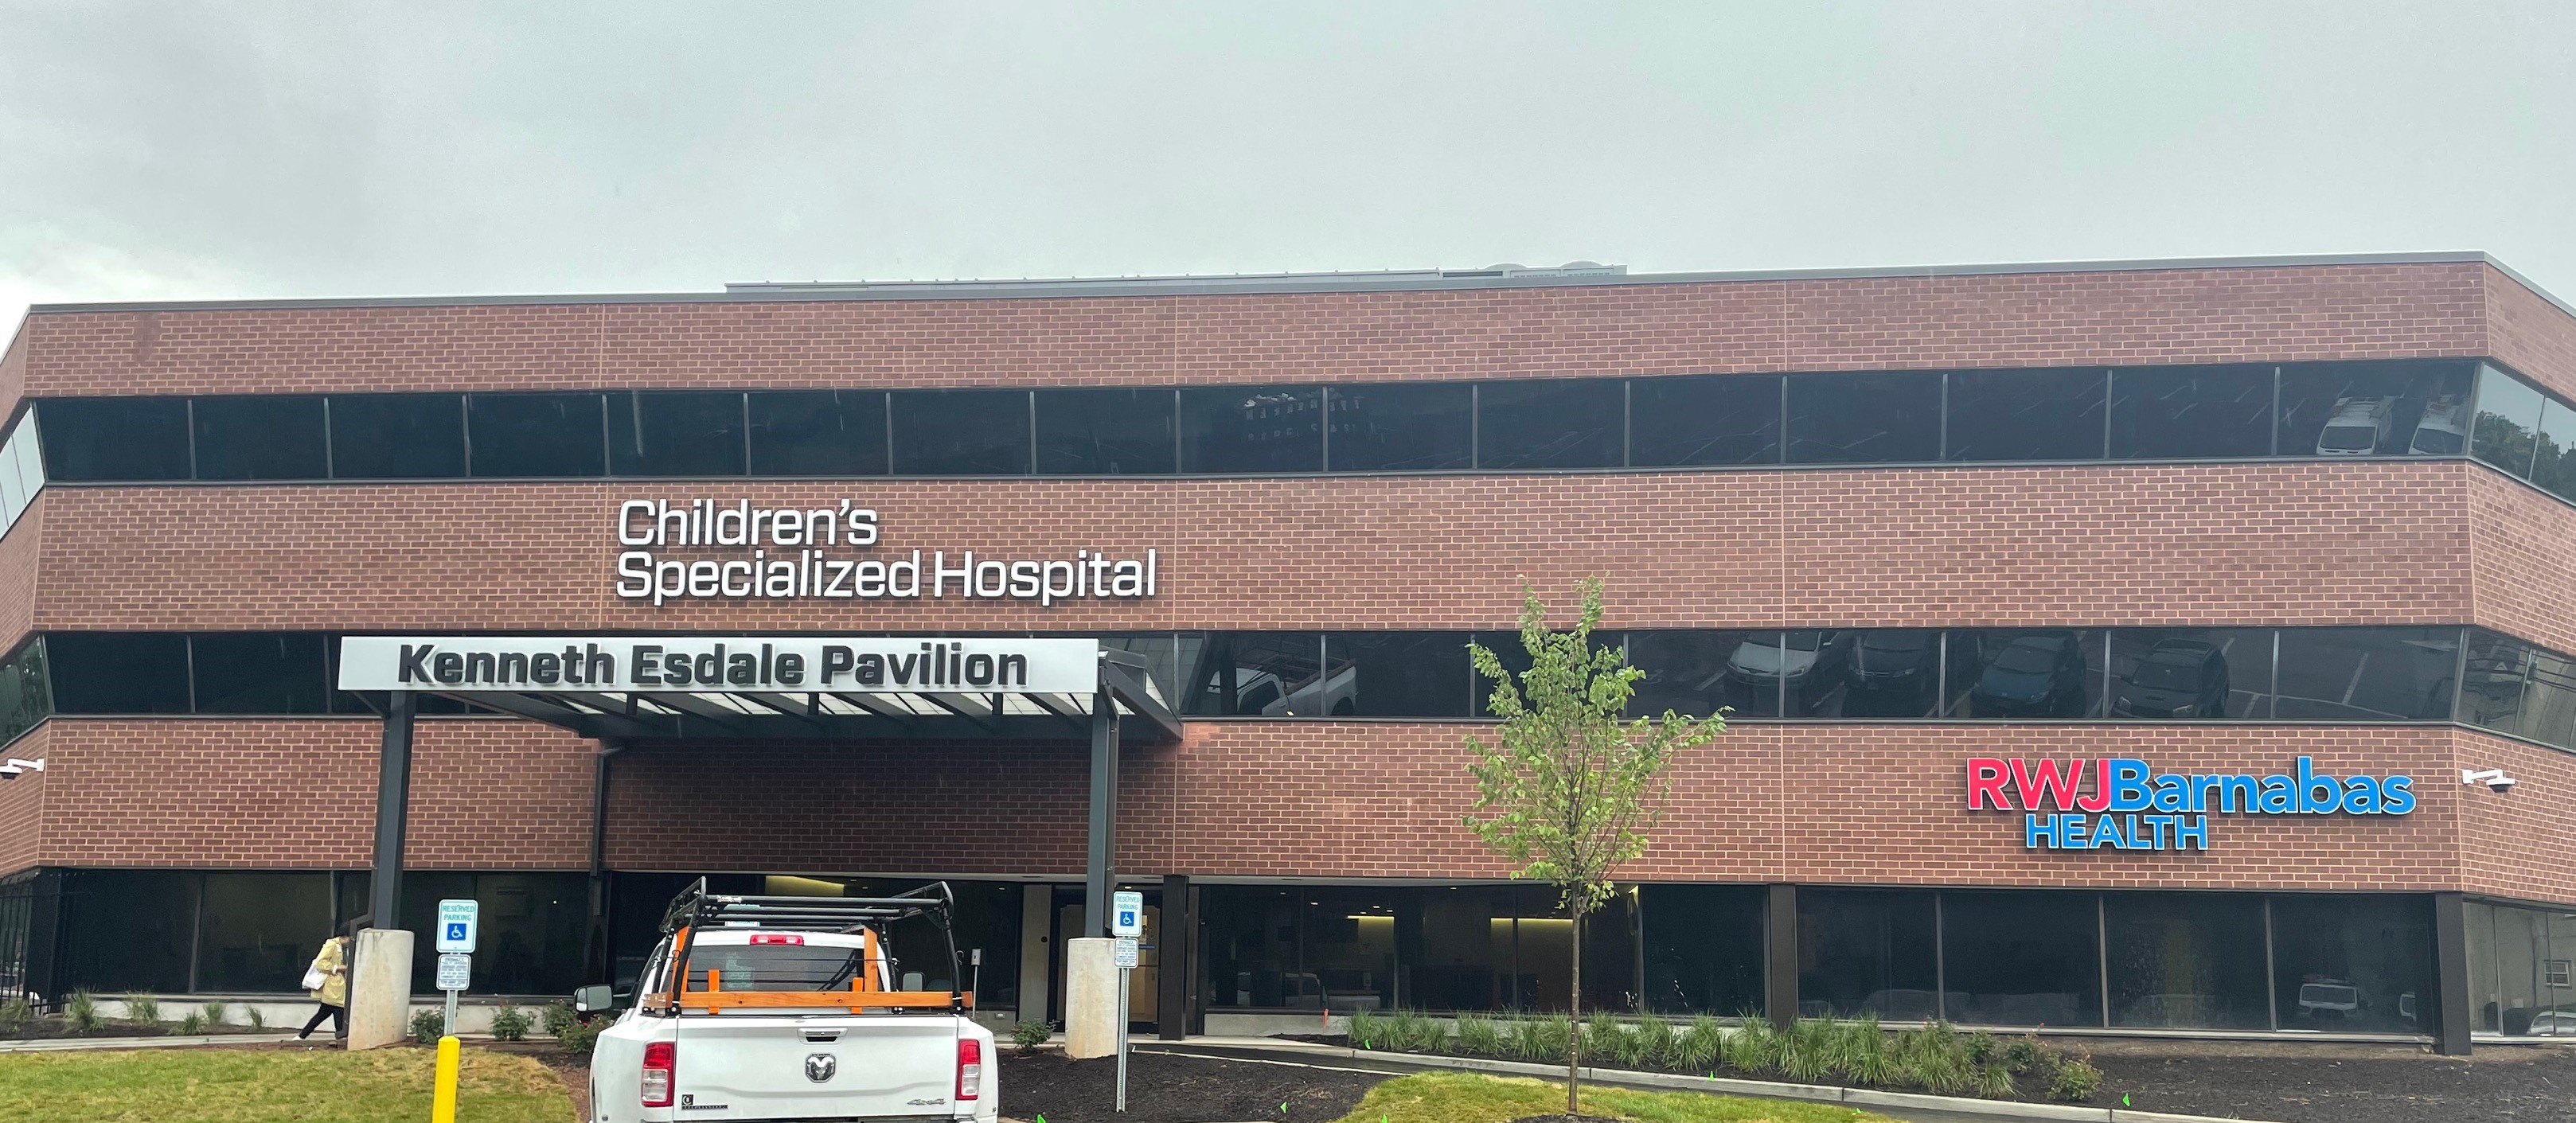 Boston O&P of Union - Children's Specialized Hospital  - NOW OPEN!